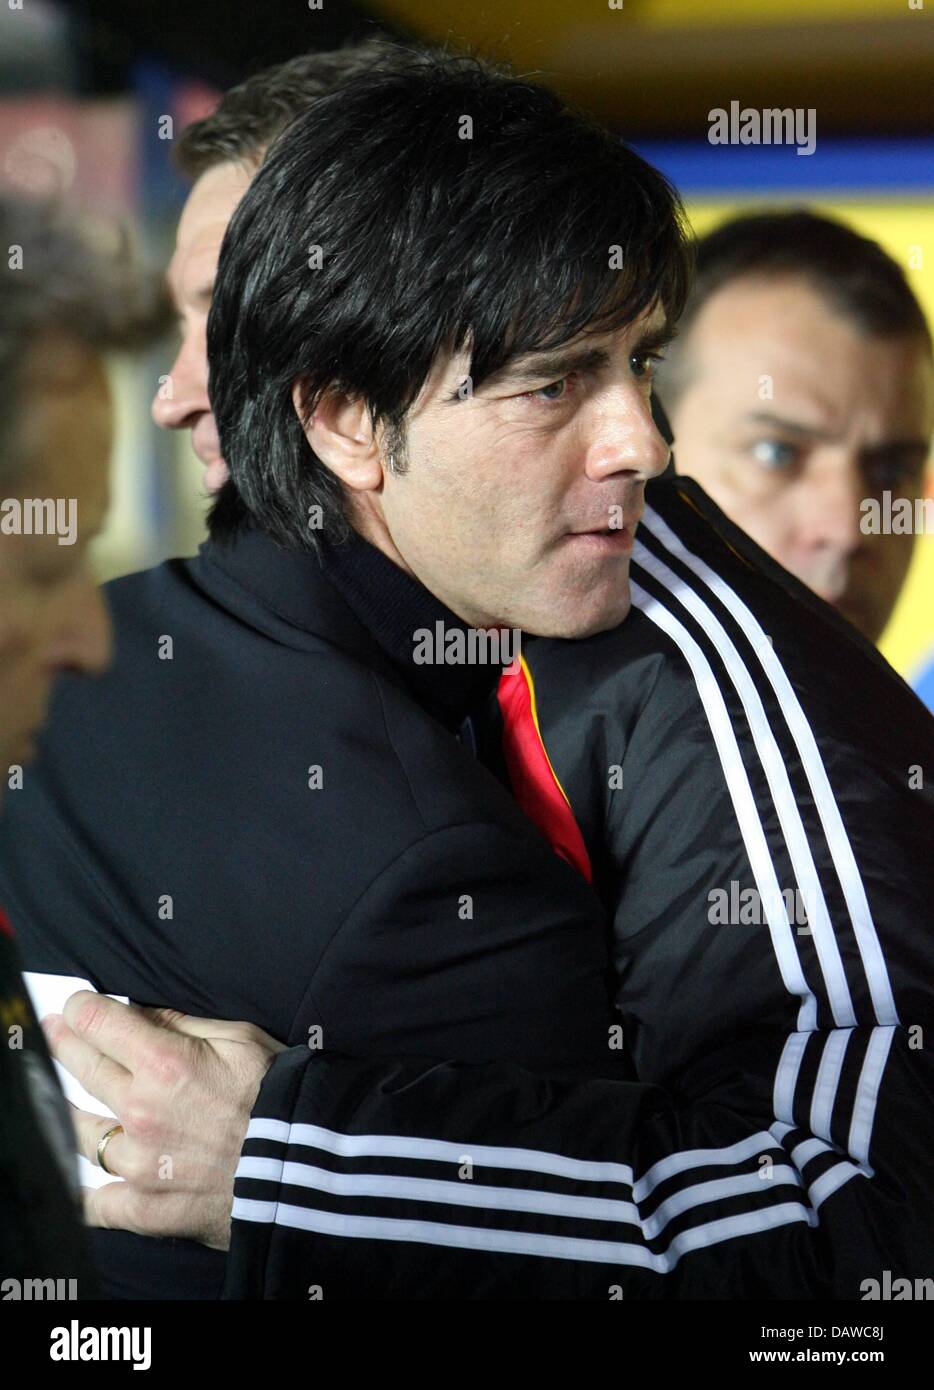 German national team head coach Joachim Loew (front) is hugged after winning the EURO 2008 qualifier Czech Republic v Germany at the Toyota Arena stadium of Prague, Czech Republic, 24 March 2007. Germany won the match 1-2 and takes over the lead in the group D table. Photo: Bernd Weissbrod Stock Photo